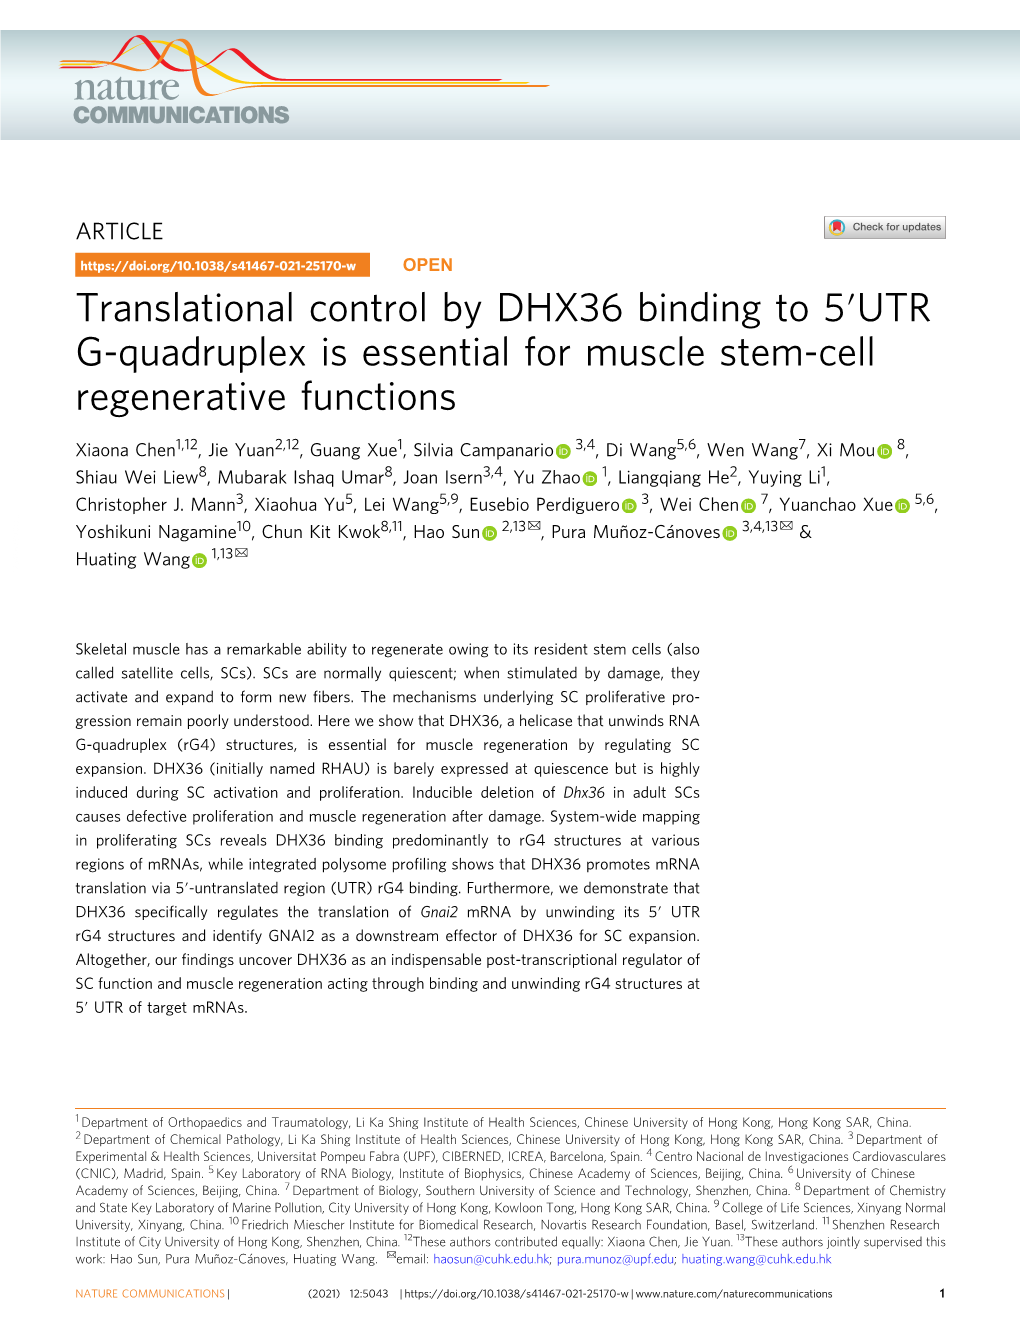 Translational Control by DHX36 Binding to 5′UTR G-Quadruplex Is Essential for Muscle Stem-Cell Regenerative Functions